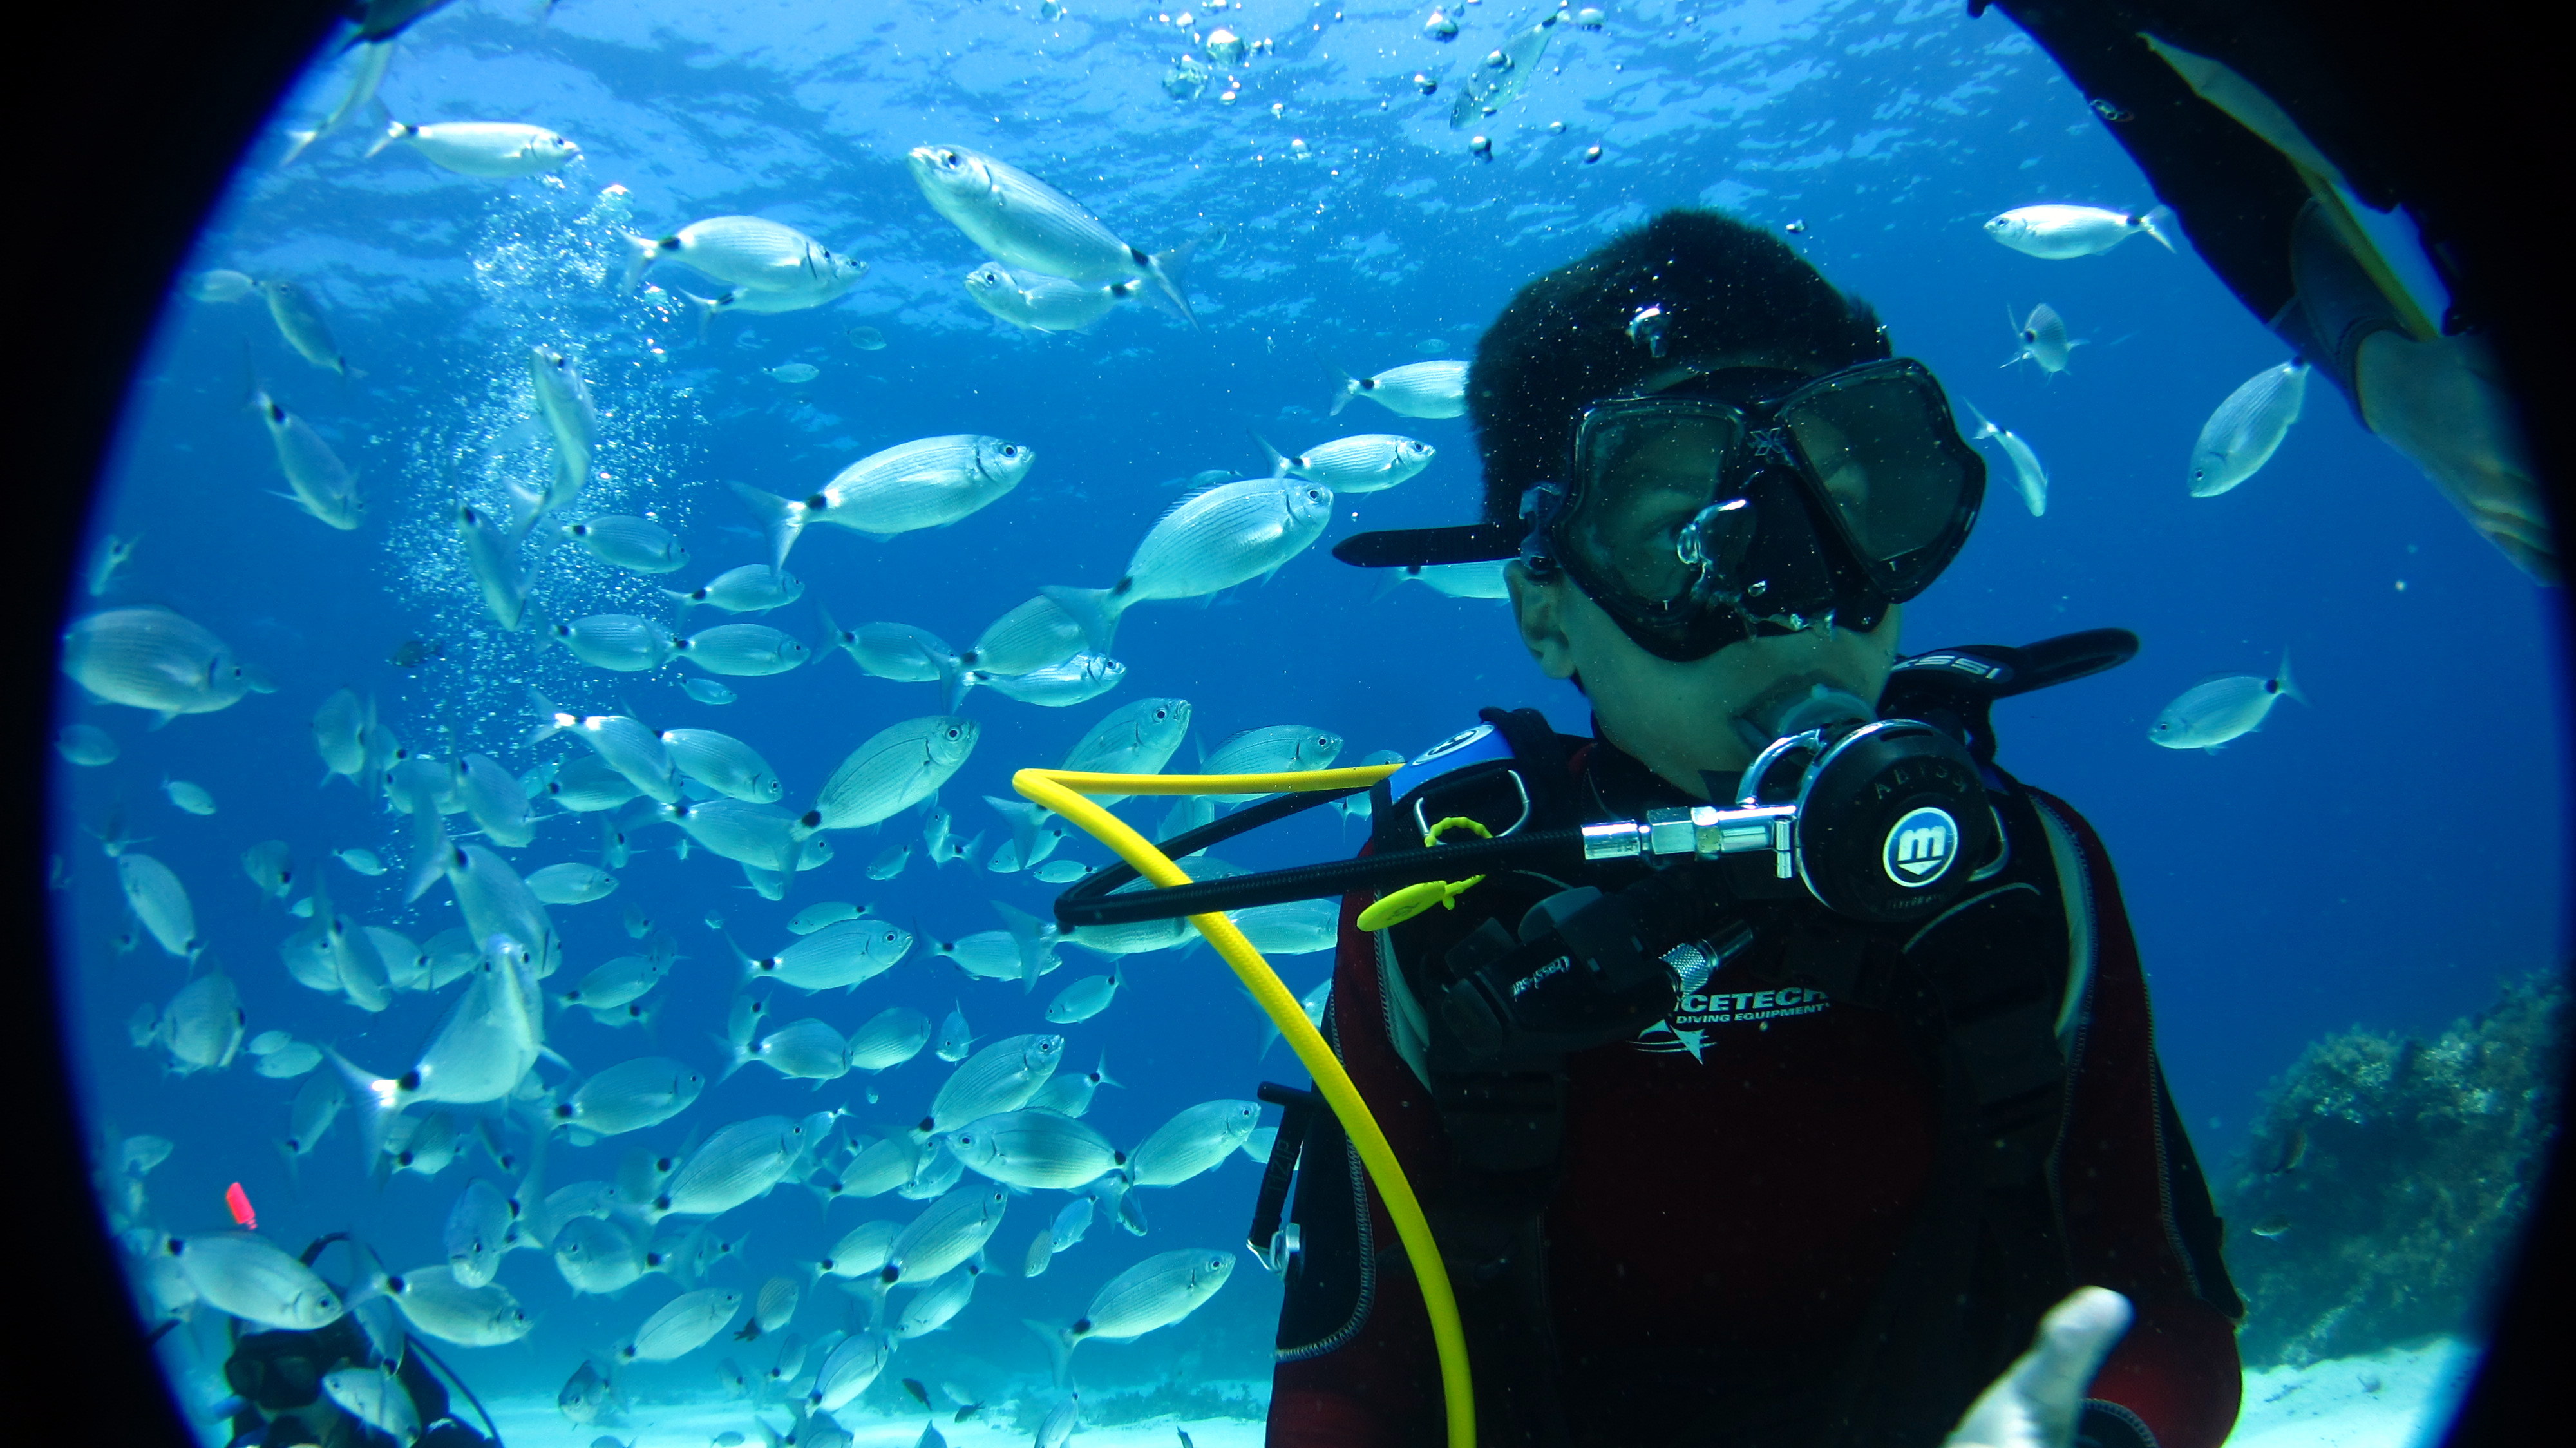 PADI Jr. Advanced Open Water Diver Course (ages 12-14)